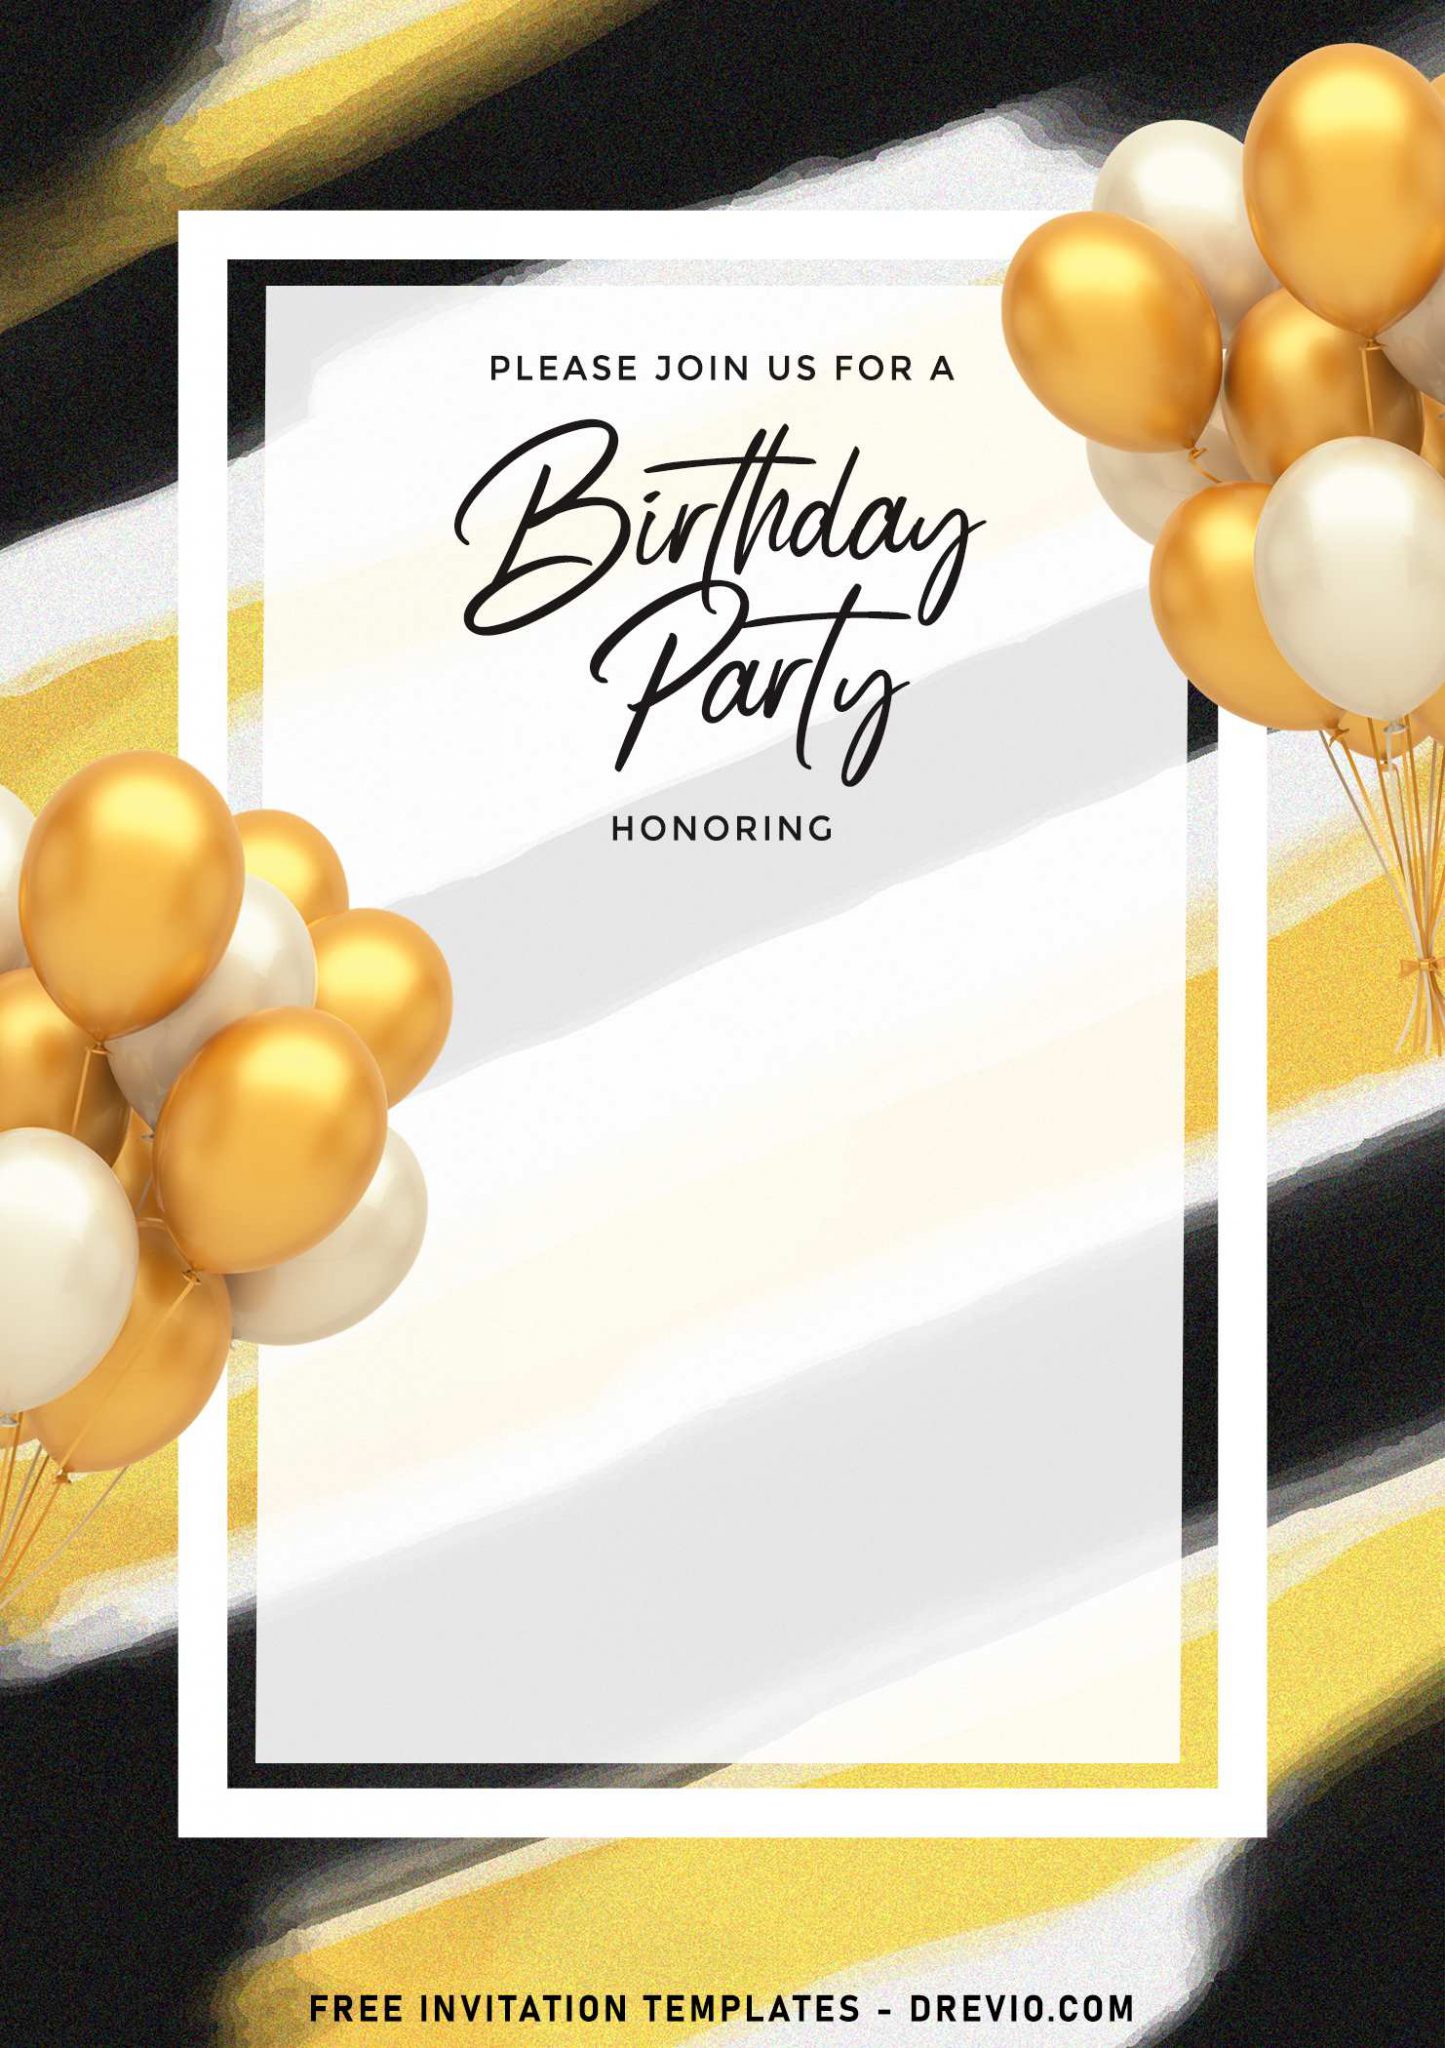 Templates For Party Invitations